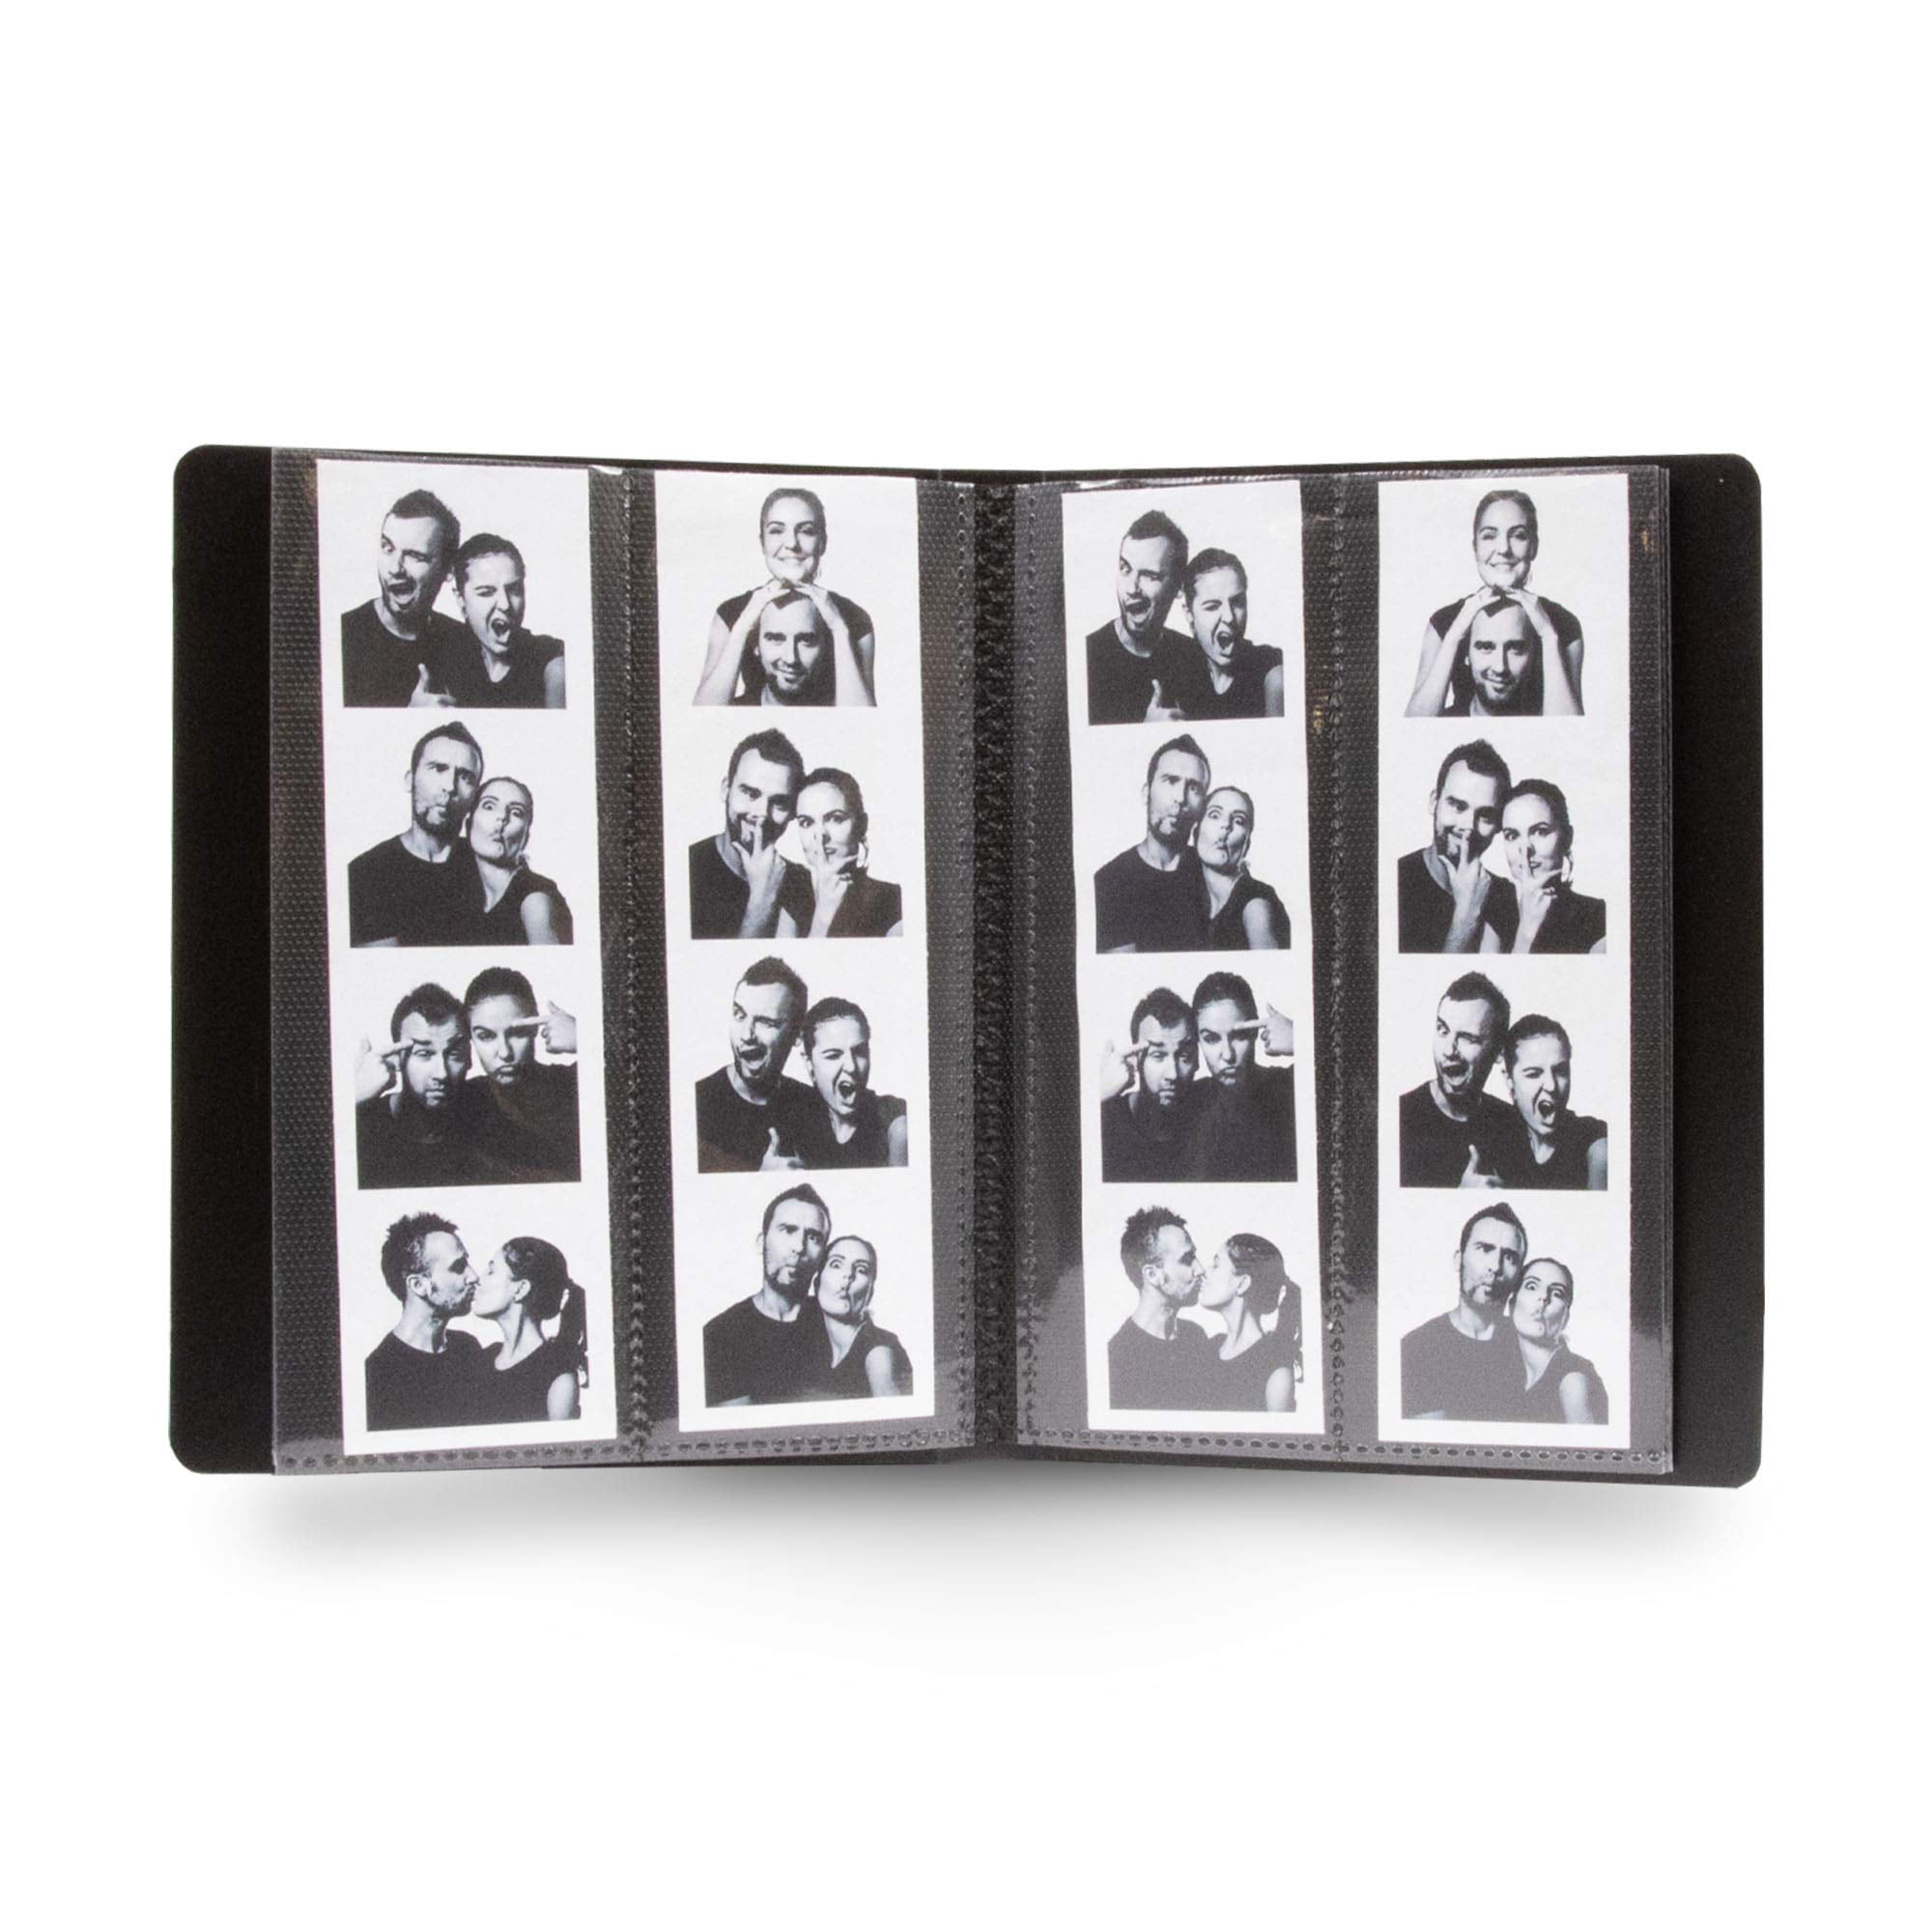 Photo Booth Picture Frame for 3 photo booth strips black frame white mat 8x10 